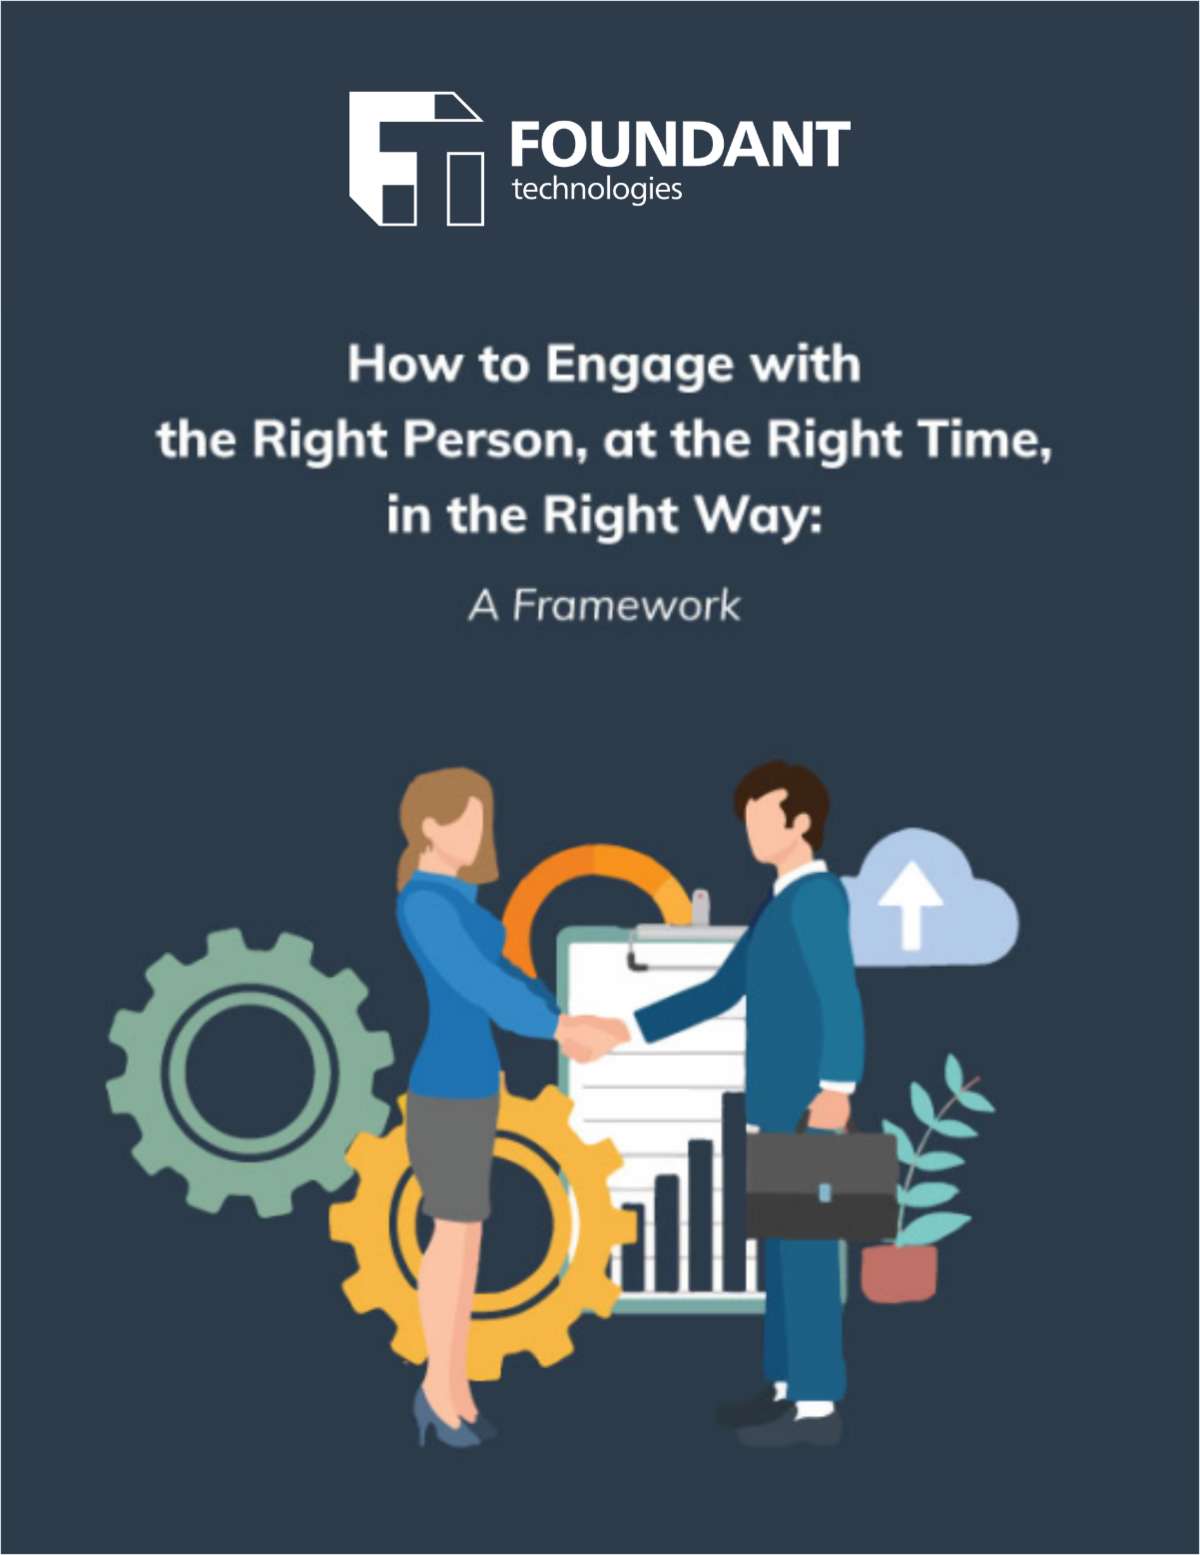 How to Engage with the Right Person, at the Right Time, in the Right Way